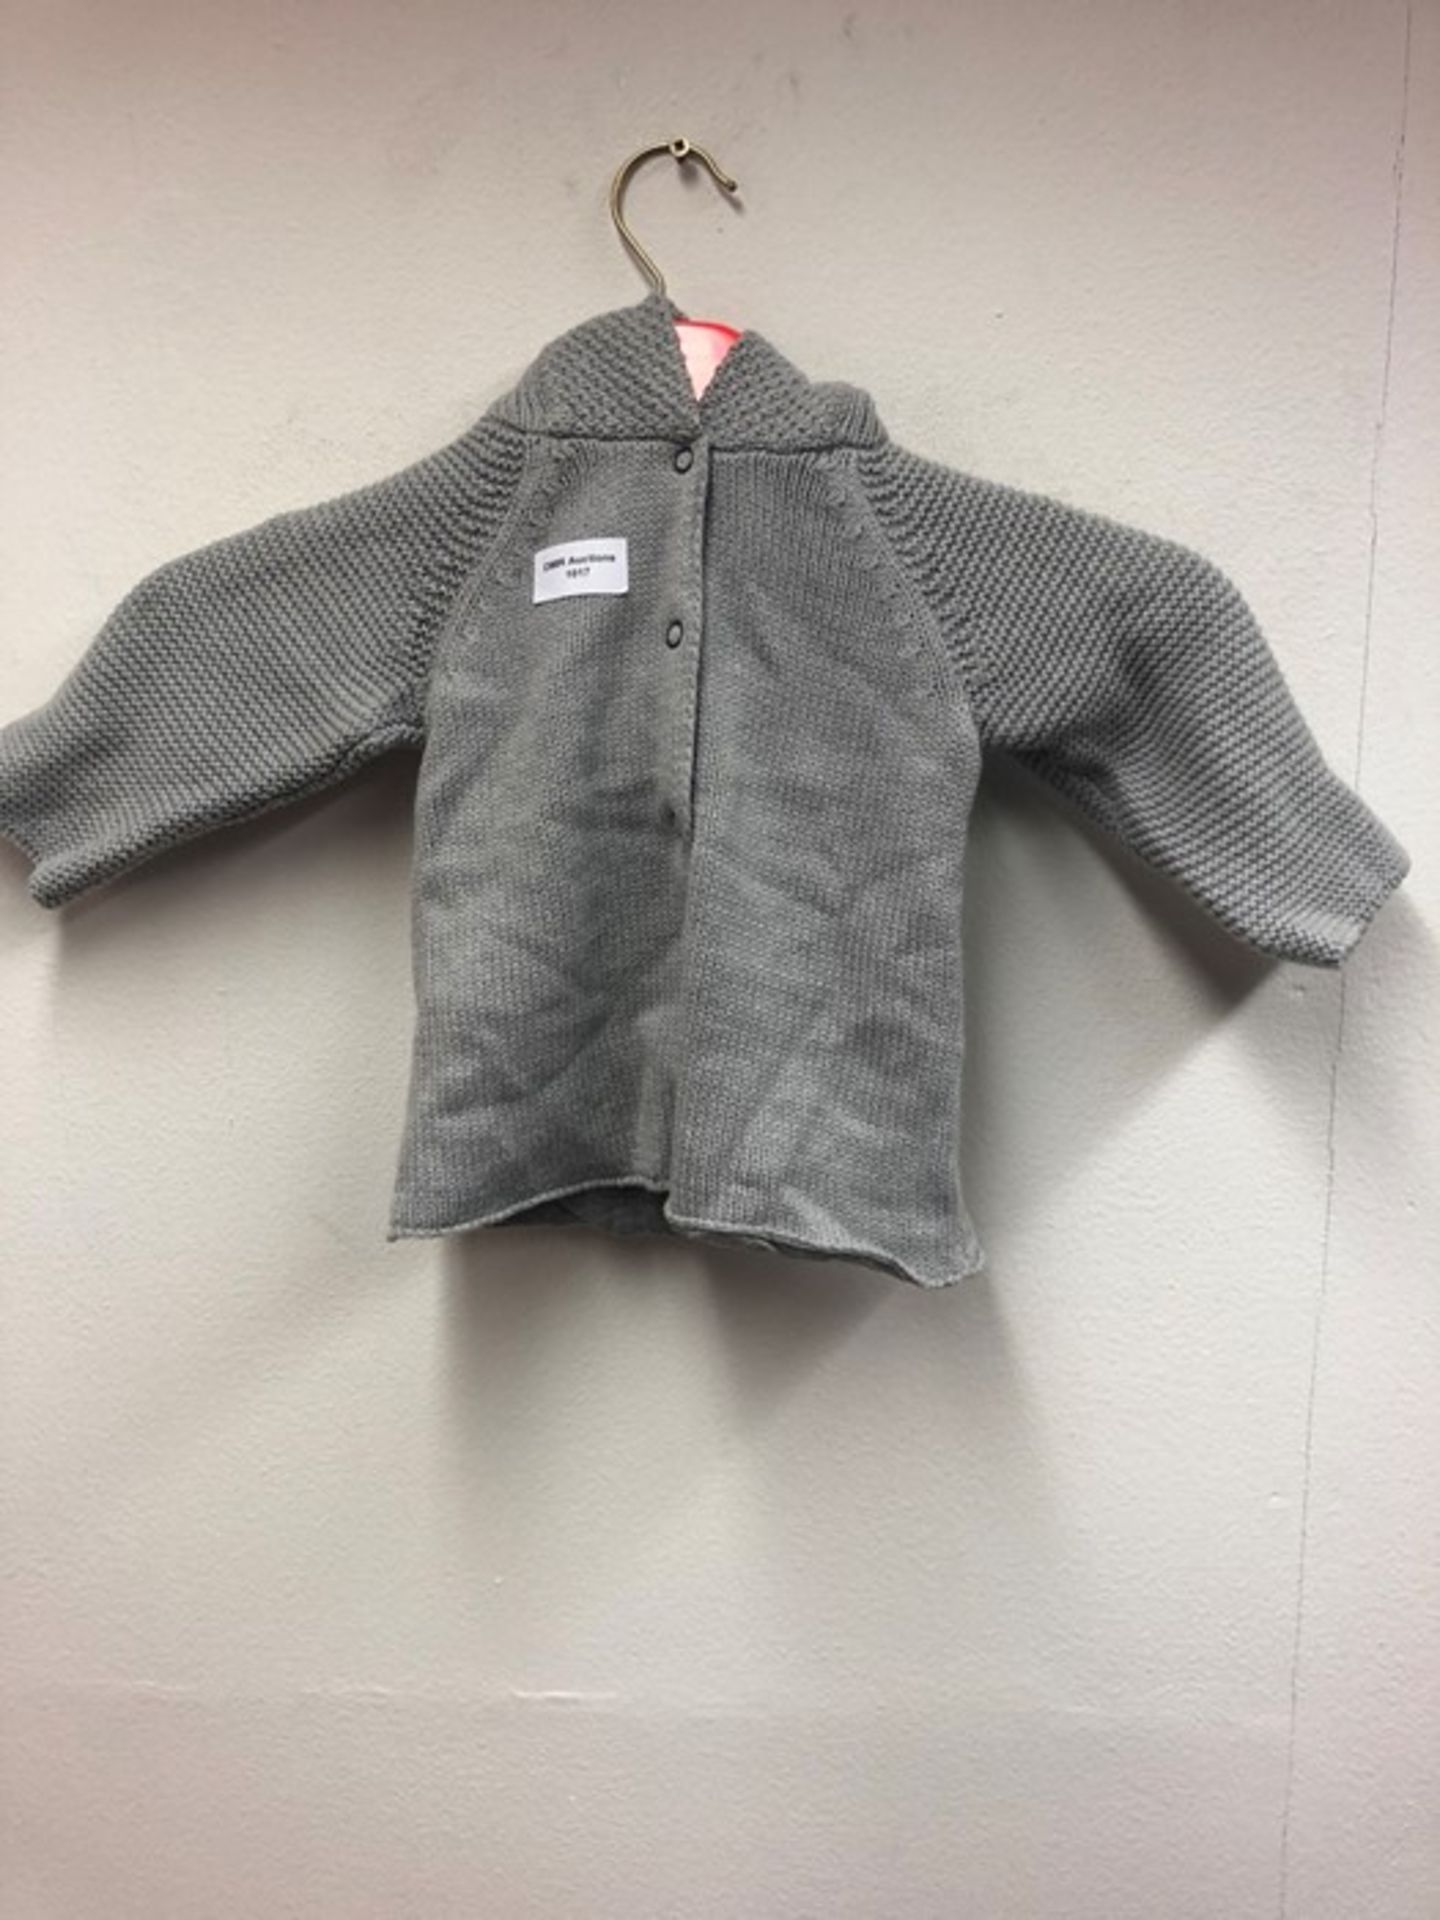 1 LA REDOUTE GREY JACKET / SIZE 26 (VIEWING HIGHLY